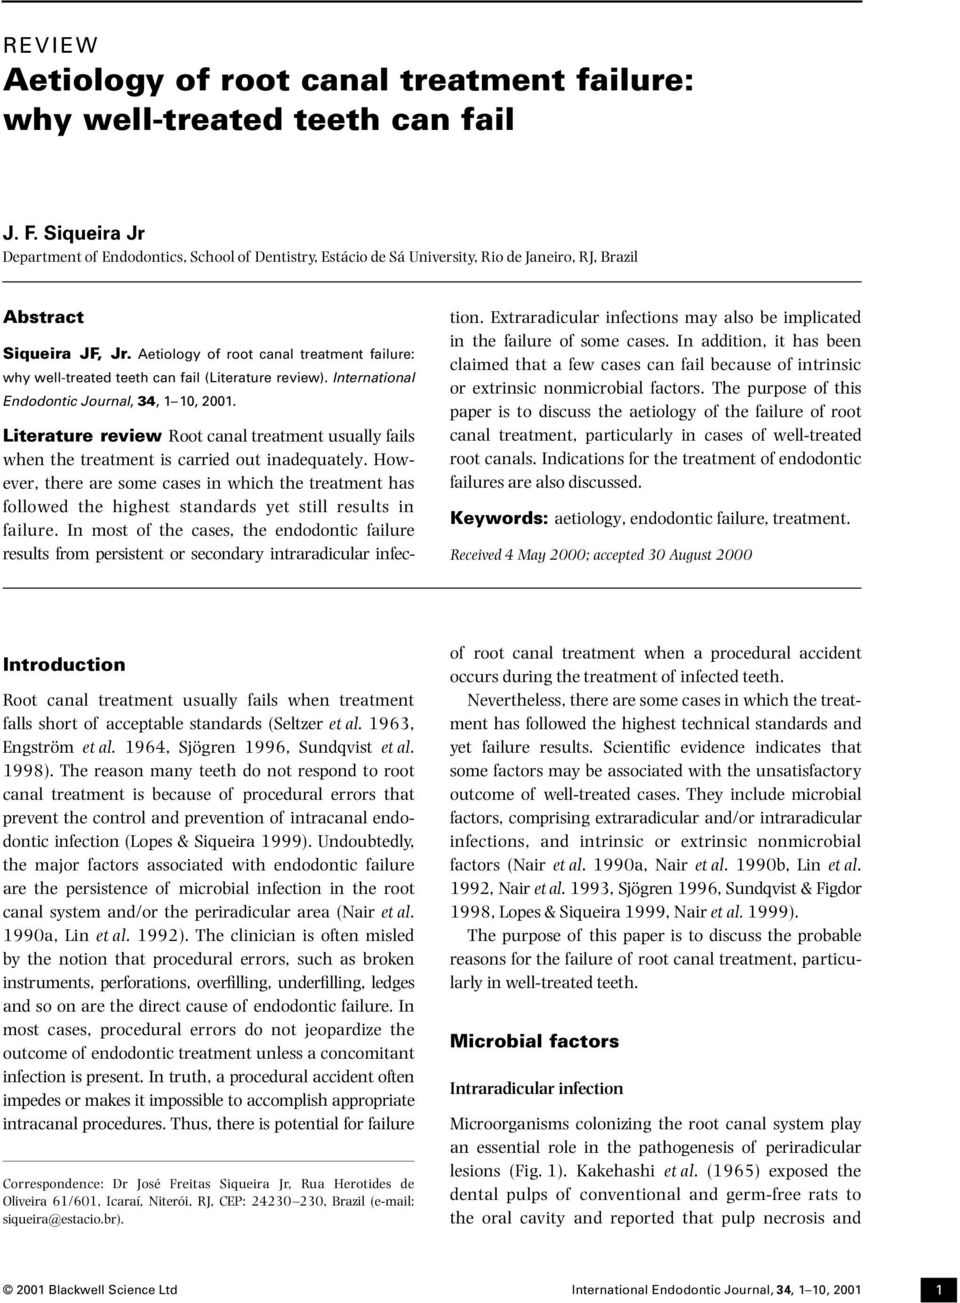 Aetiology of root canal treatment failure: why well-treated teeth can fail (Literature review). International Endodontic Journal, 34, 1 10, 2001.